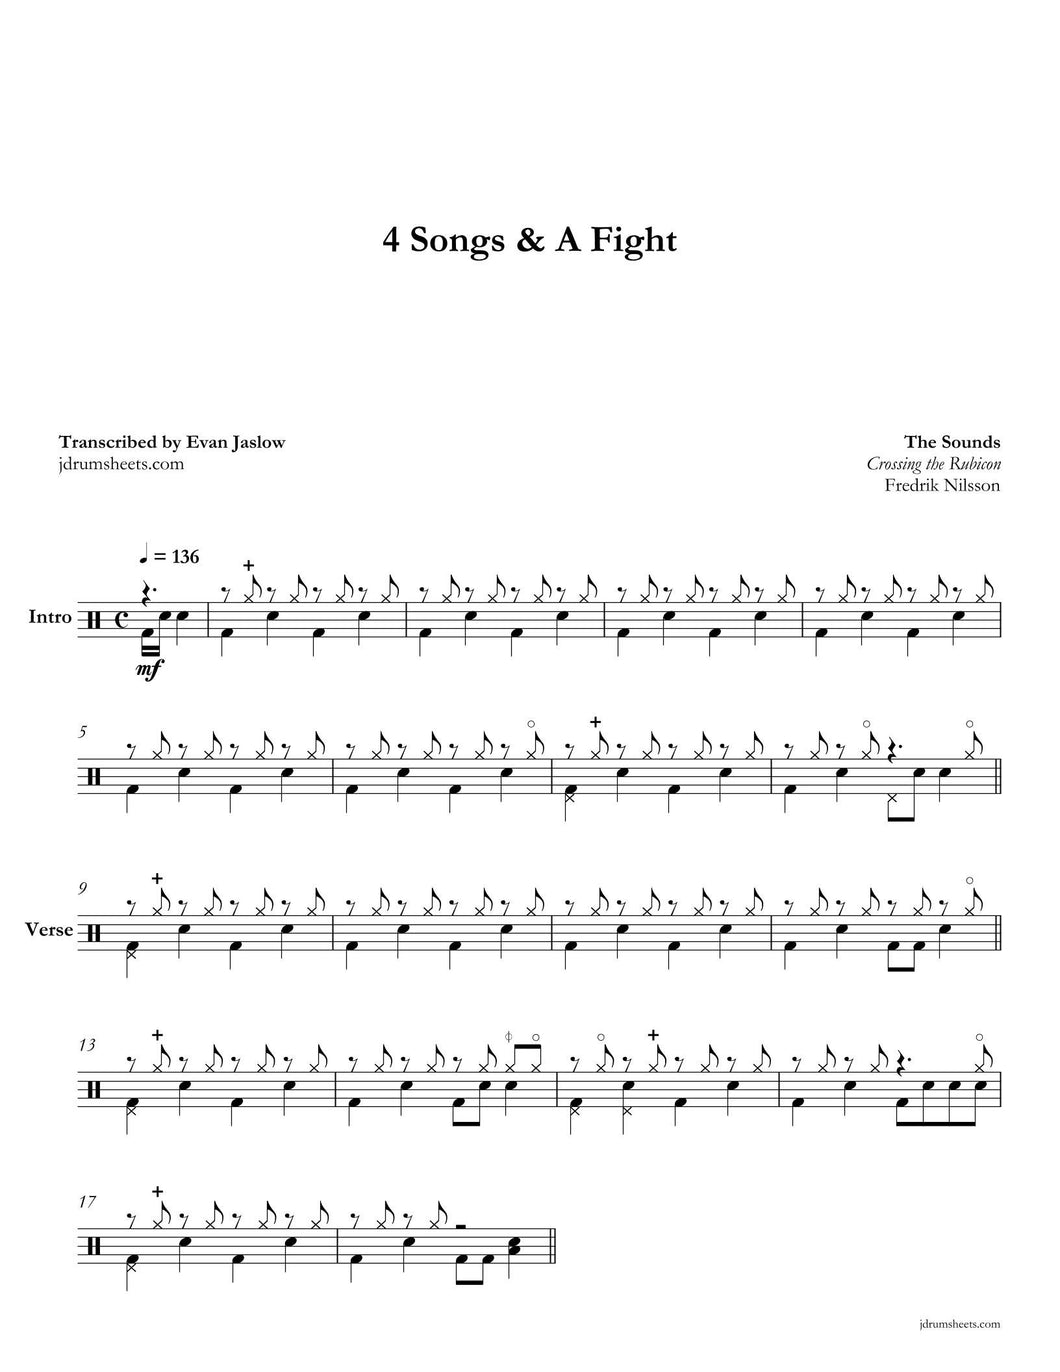 4 Songs & a Fight - The Sounds - Full Drum Transcription / Drum Sheet Music - Jaslow Drum Sheets